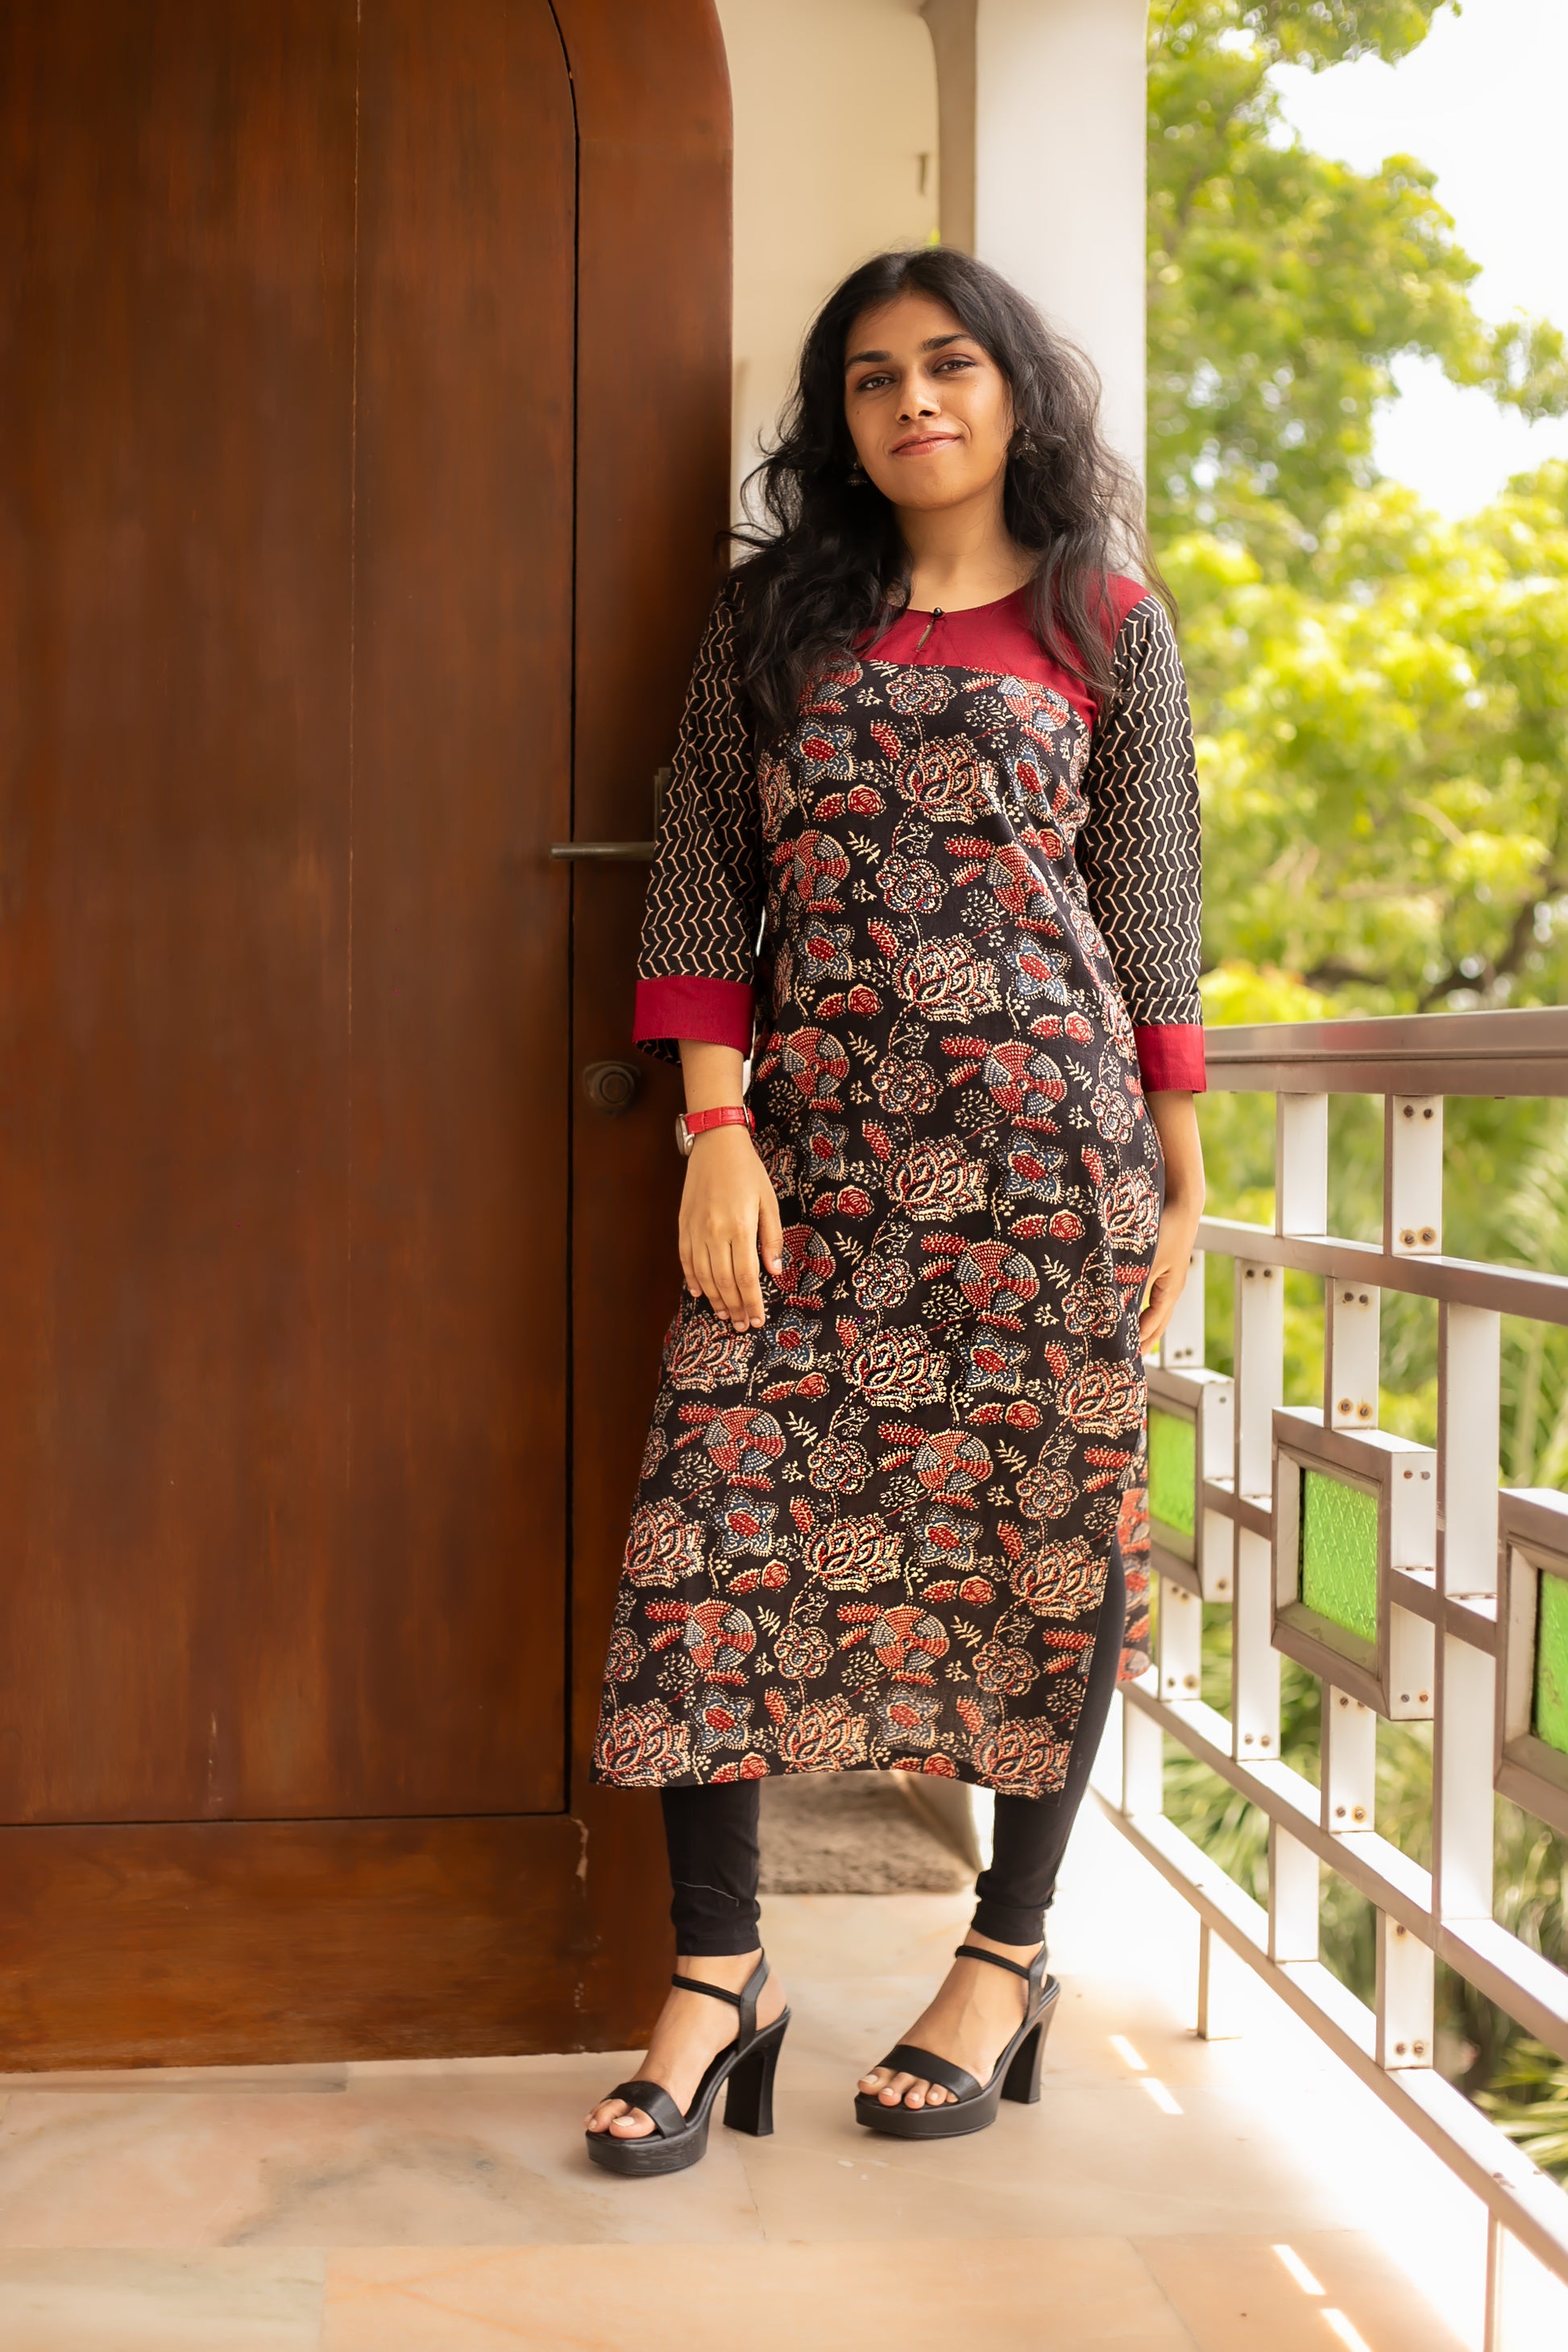 Black Floral Print Cotton designer Kurti, featuring striking contrast red neck and sleeve detailing.